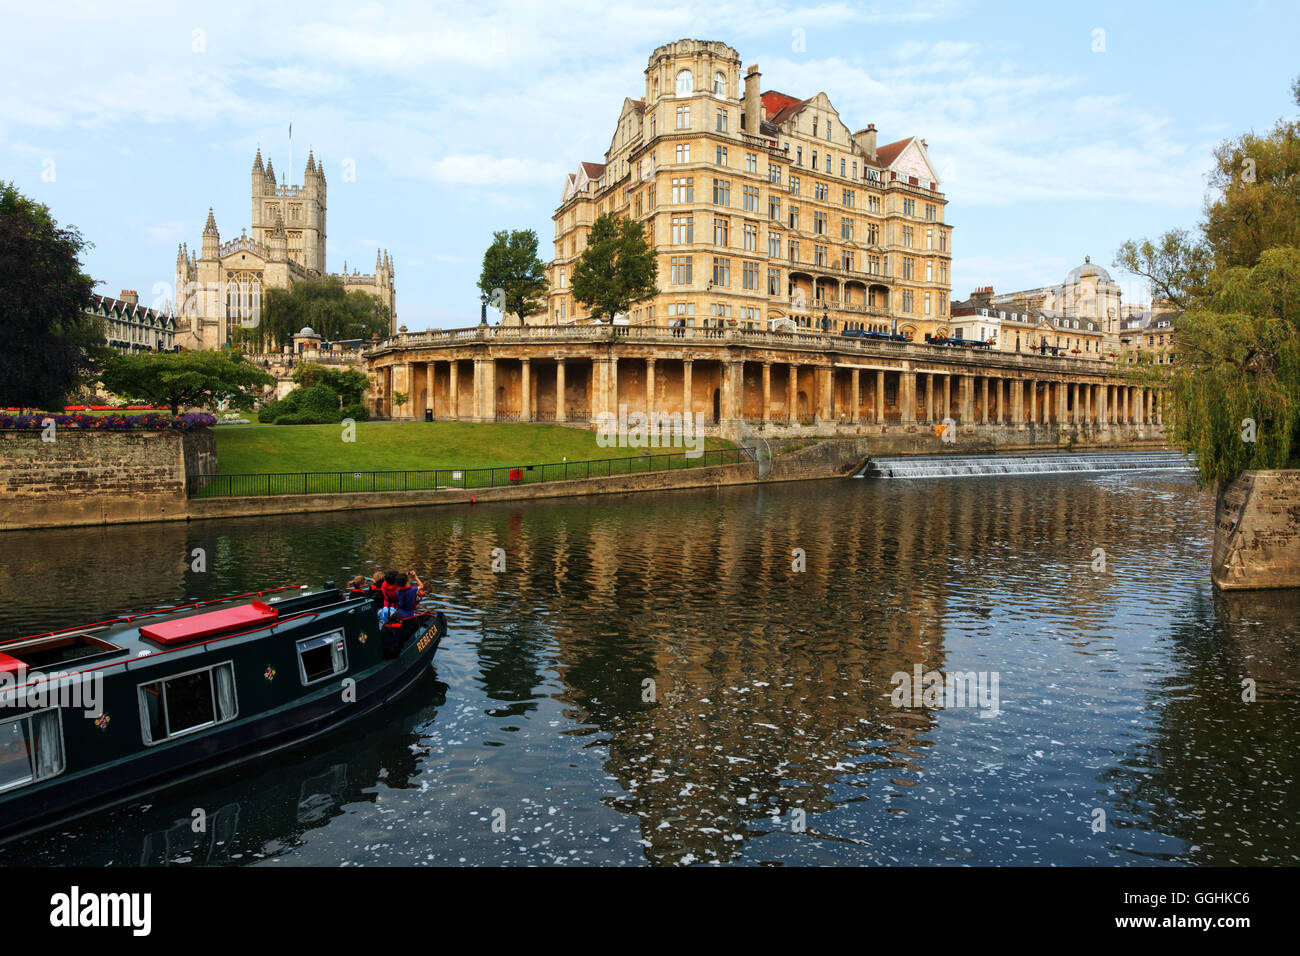 The Abbey, the Empire Building and the Grand Parade along the River Avon, Bath, Somerset, England, Great Britain Stock Photo